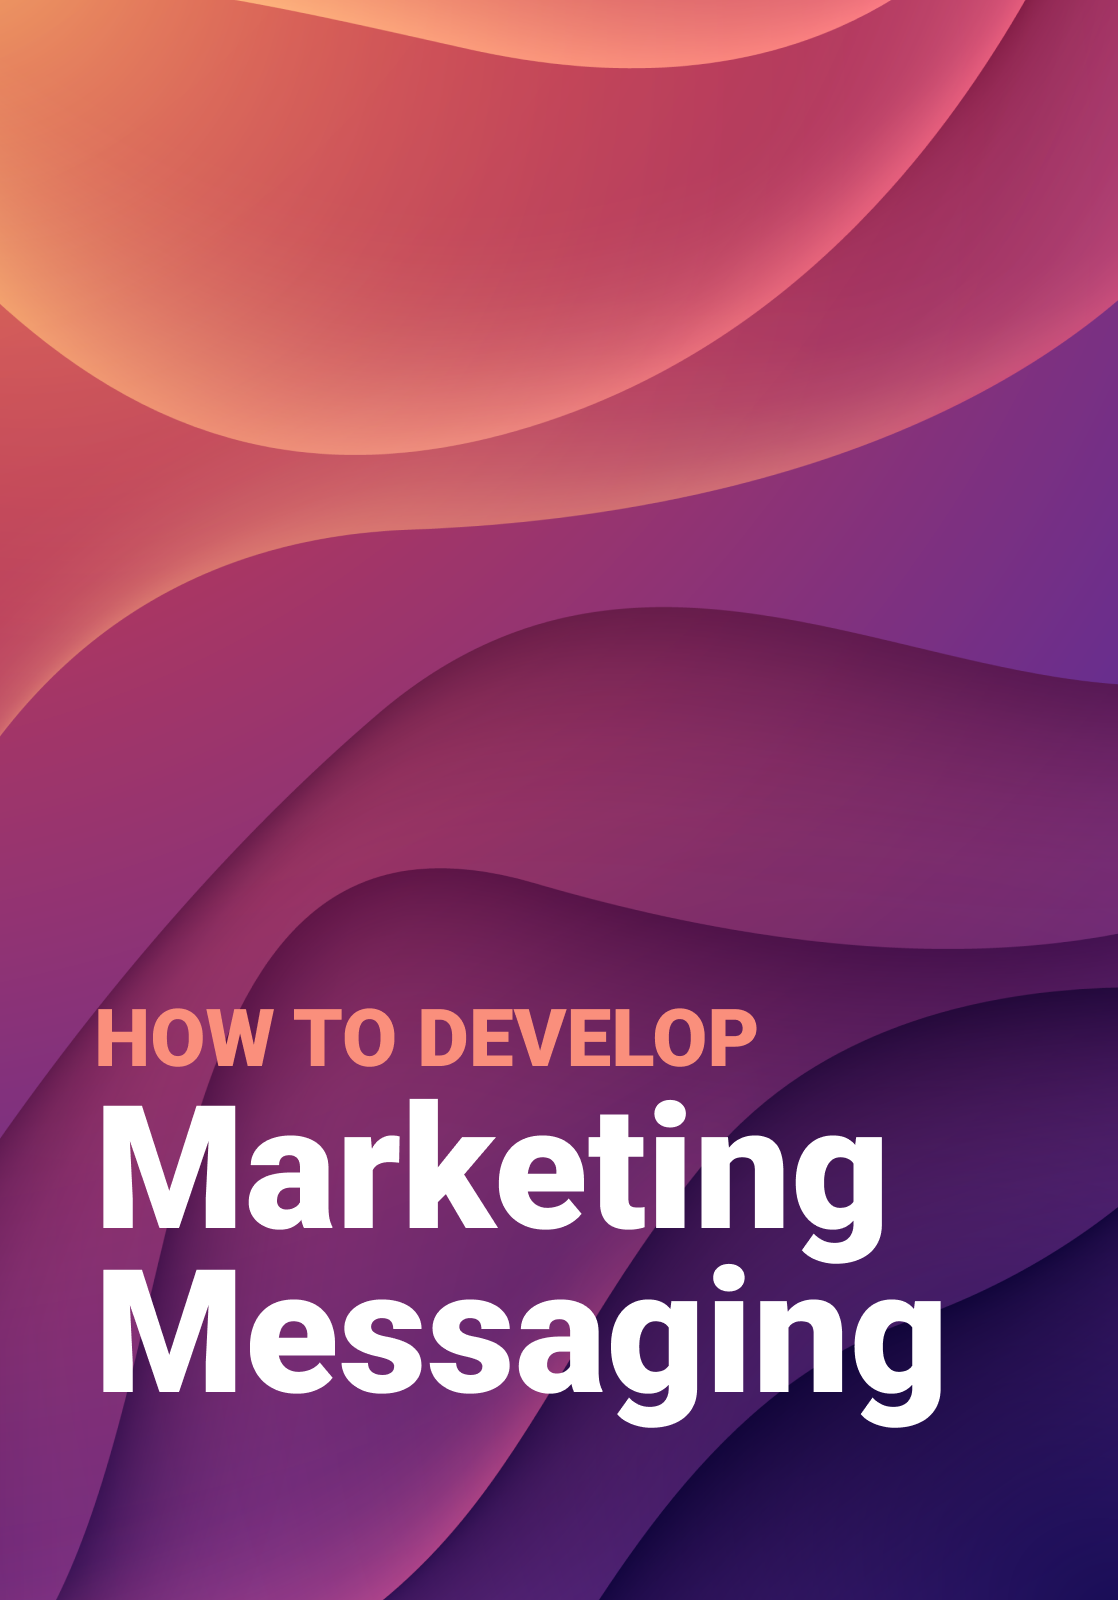 How to Develop Marketing Messaging